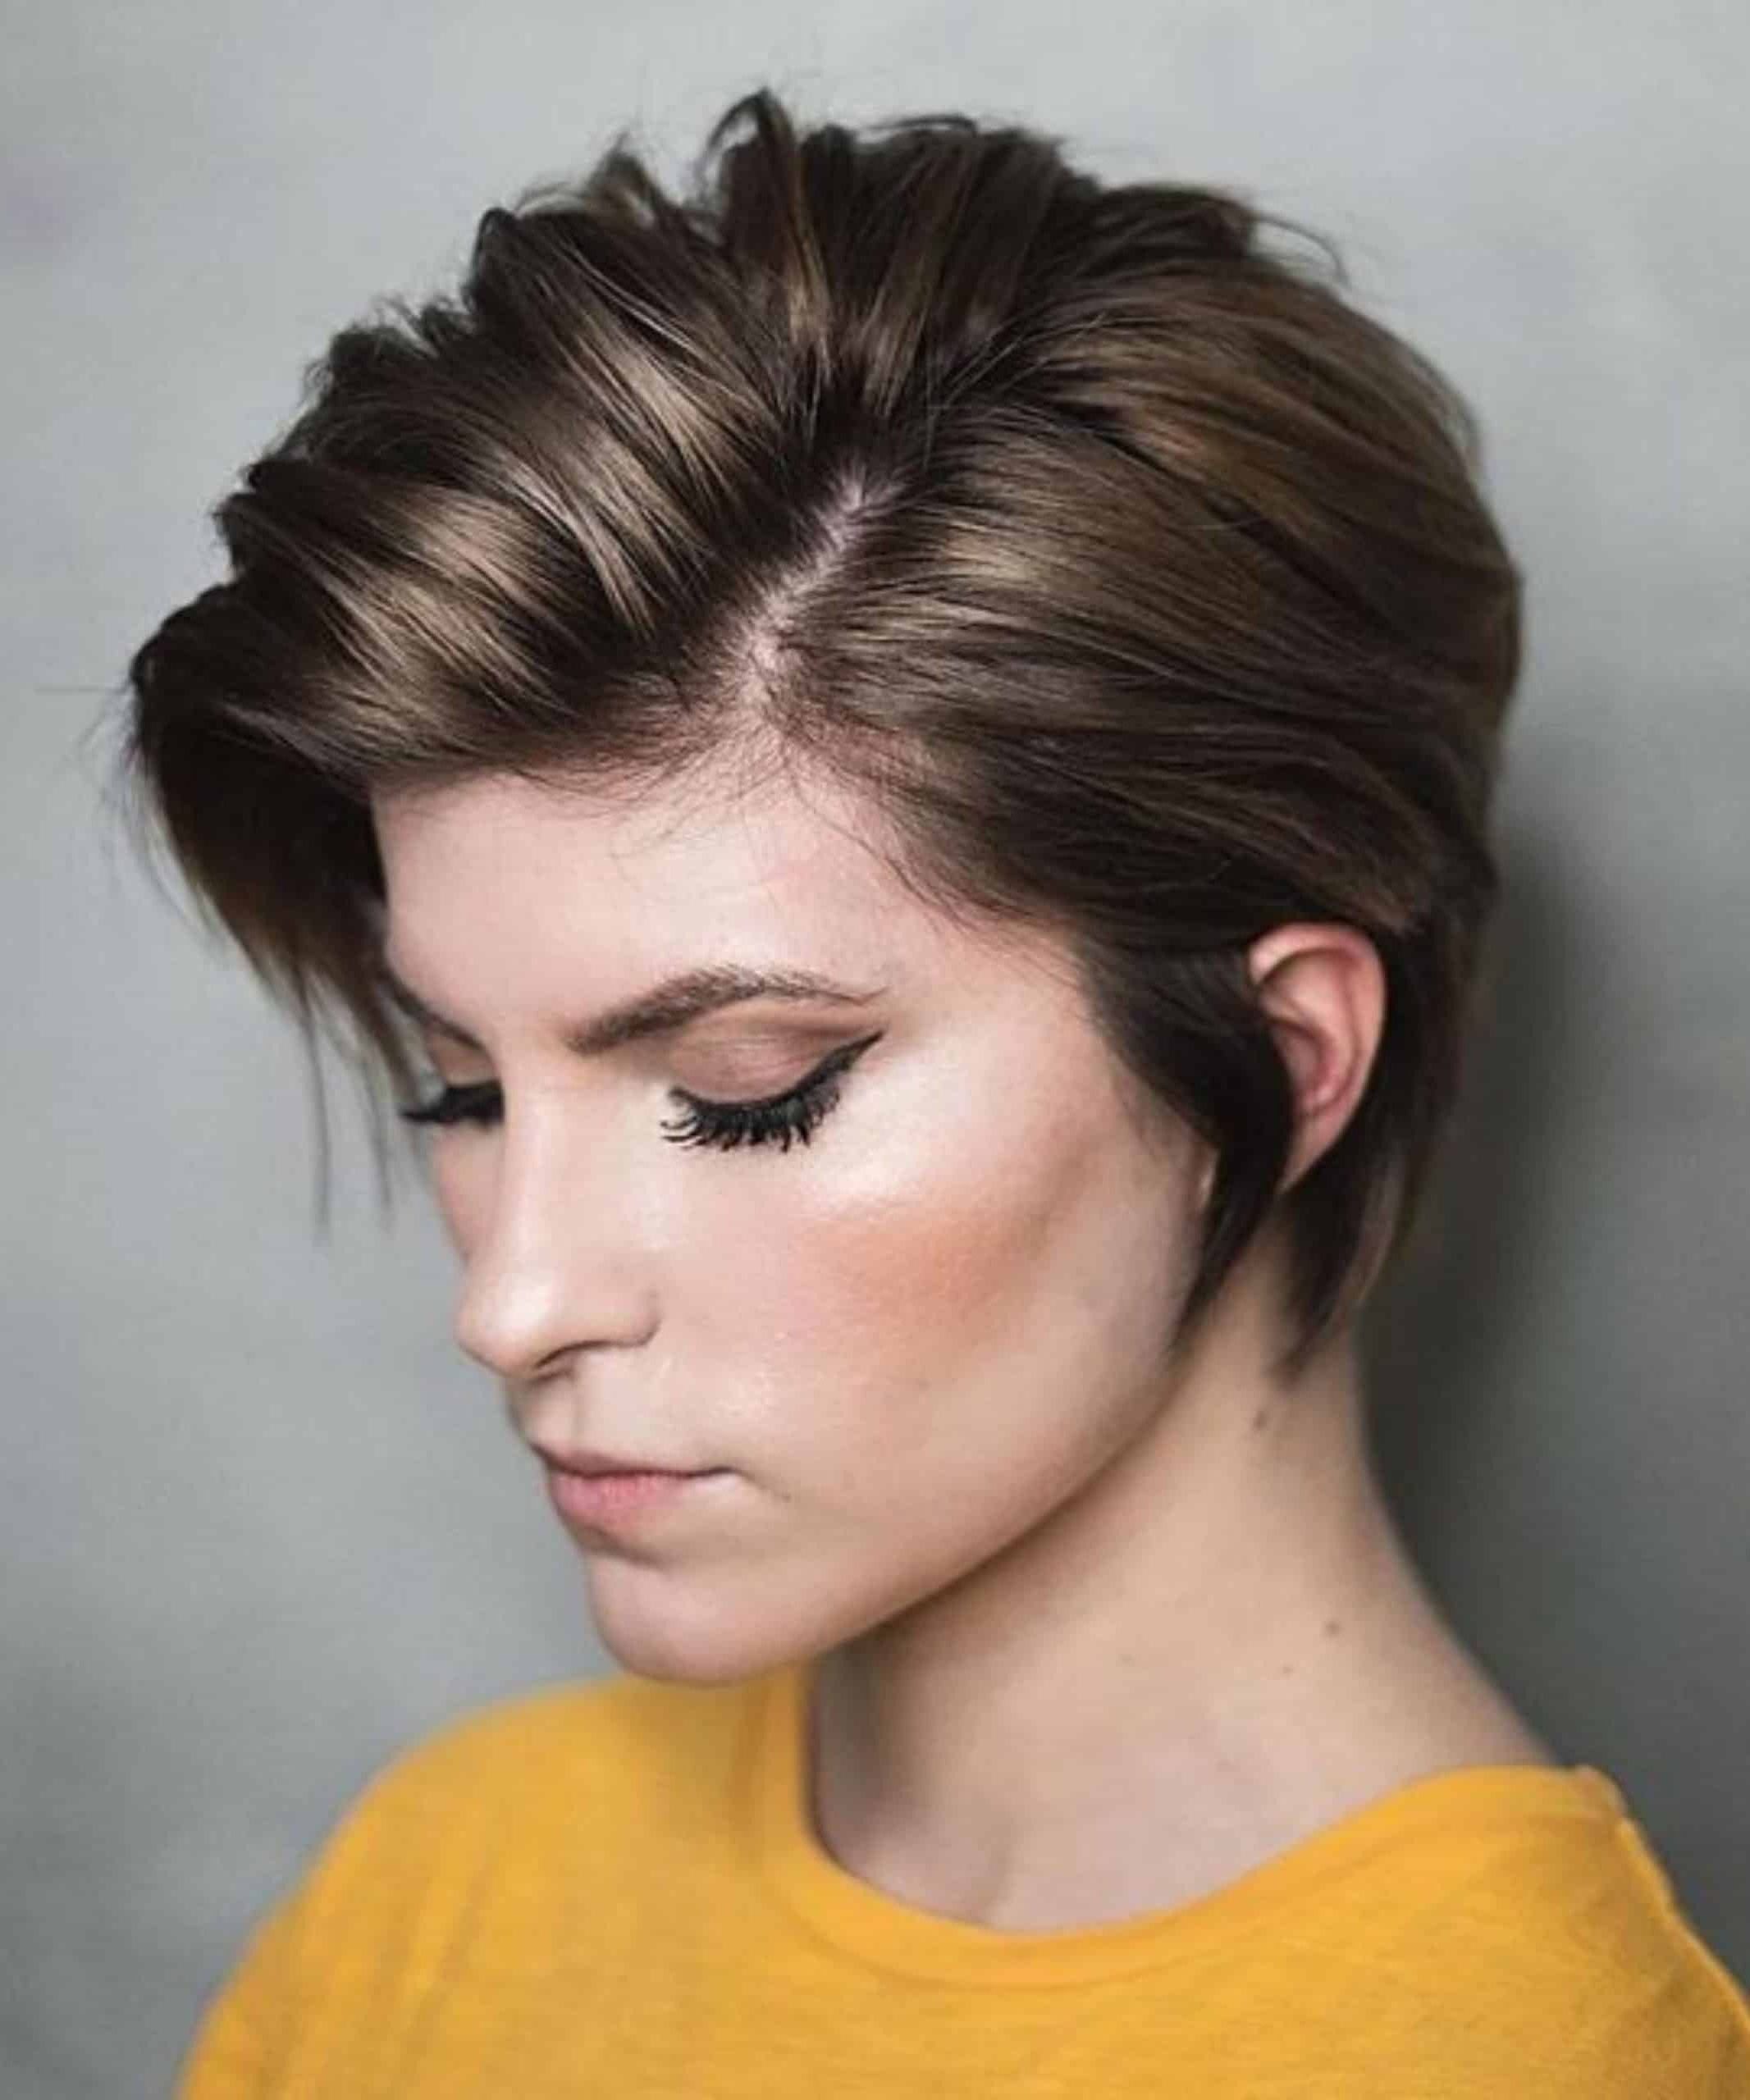 long pixie cut with bangs